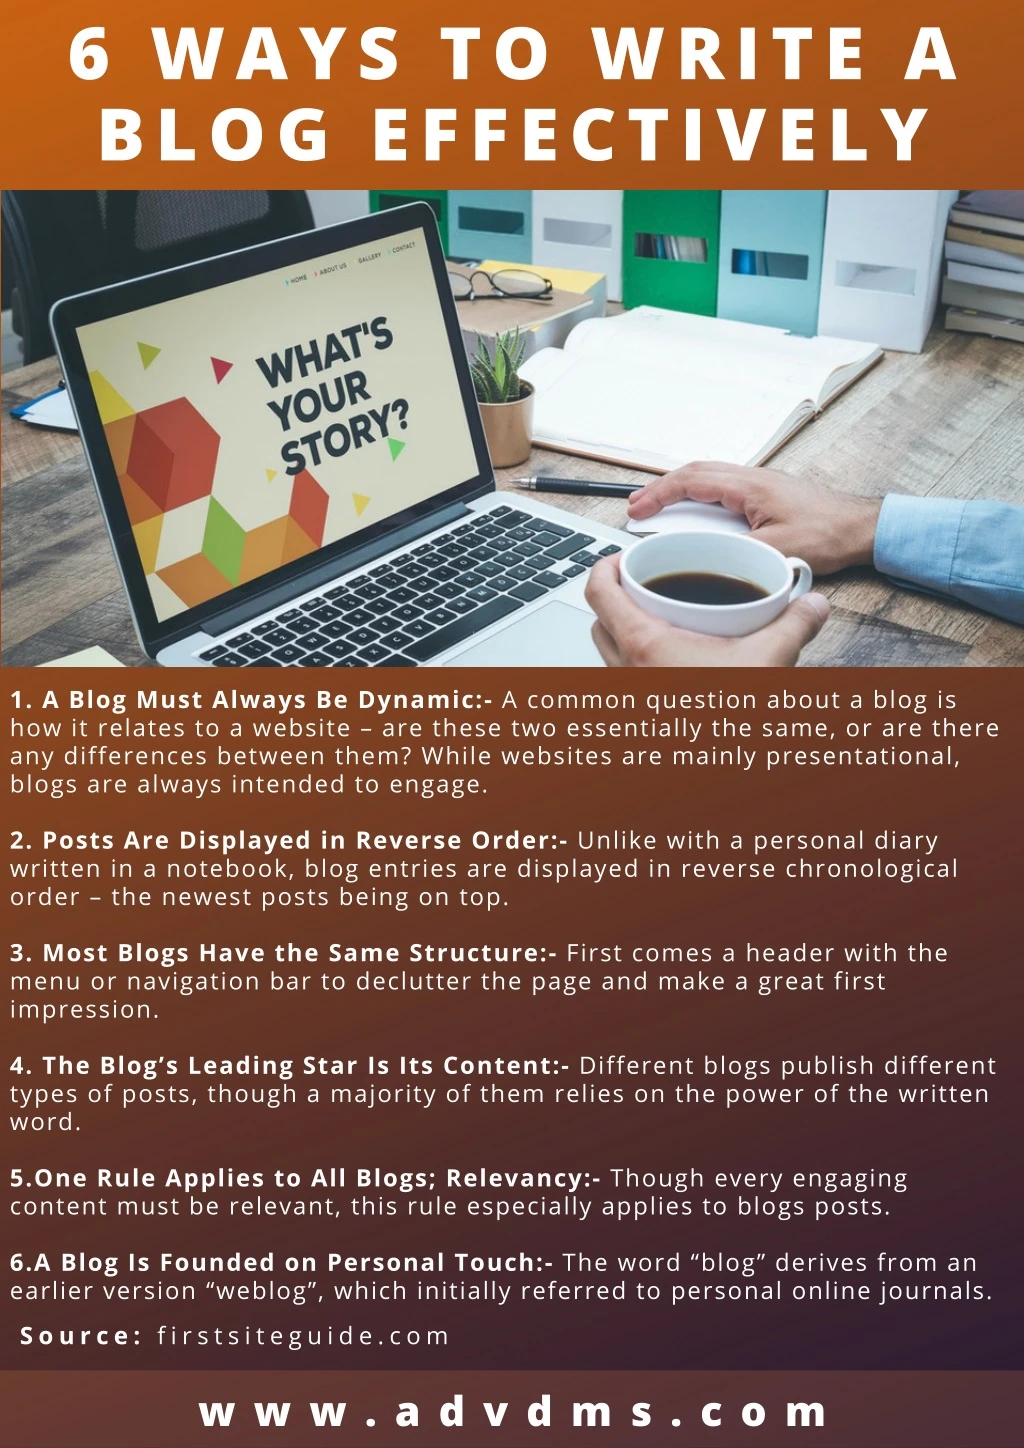 6 ways to write a blog effectively